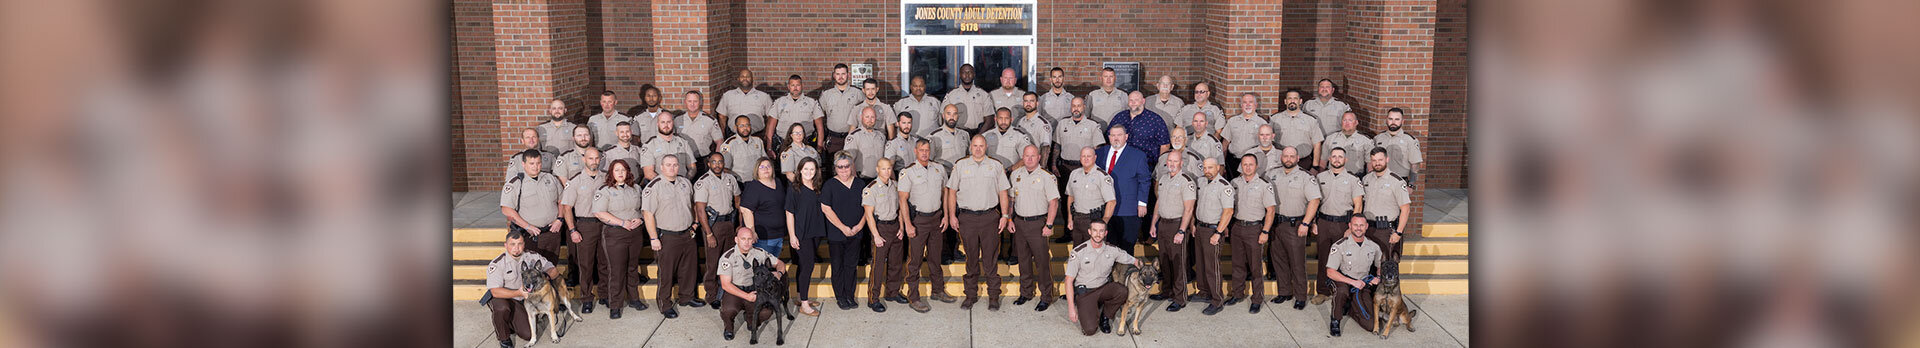 Jones County Sheriff's office personnel photo with k9s